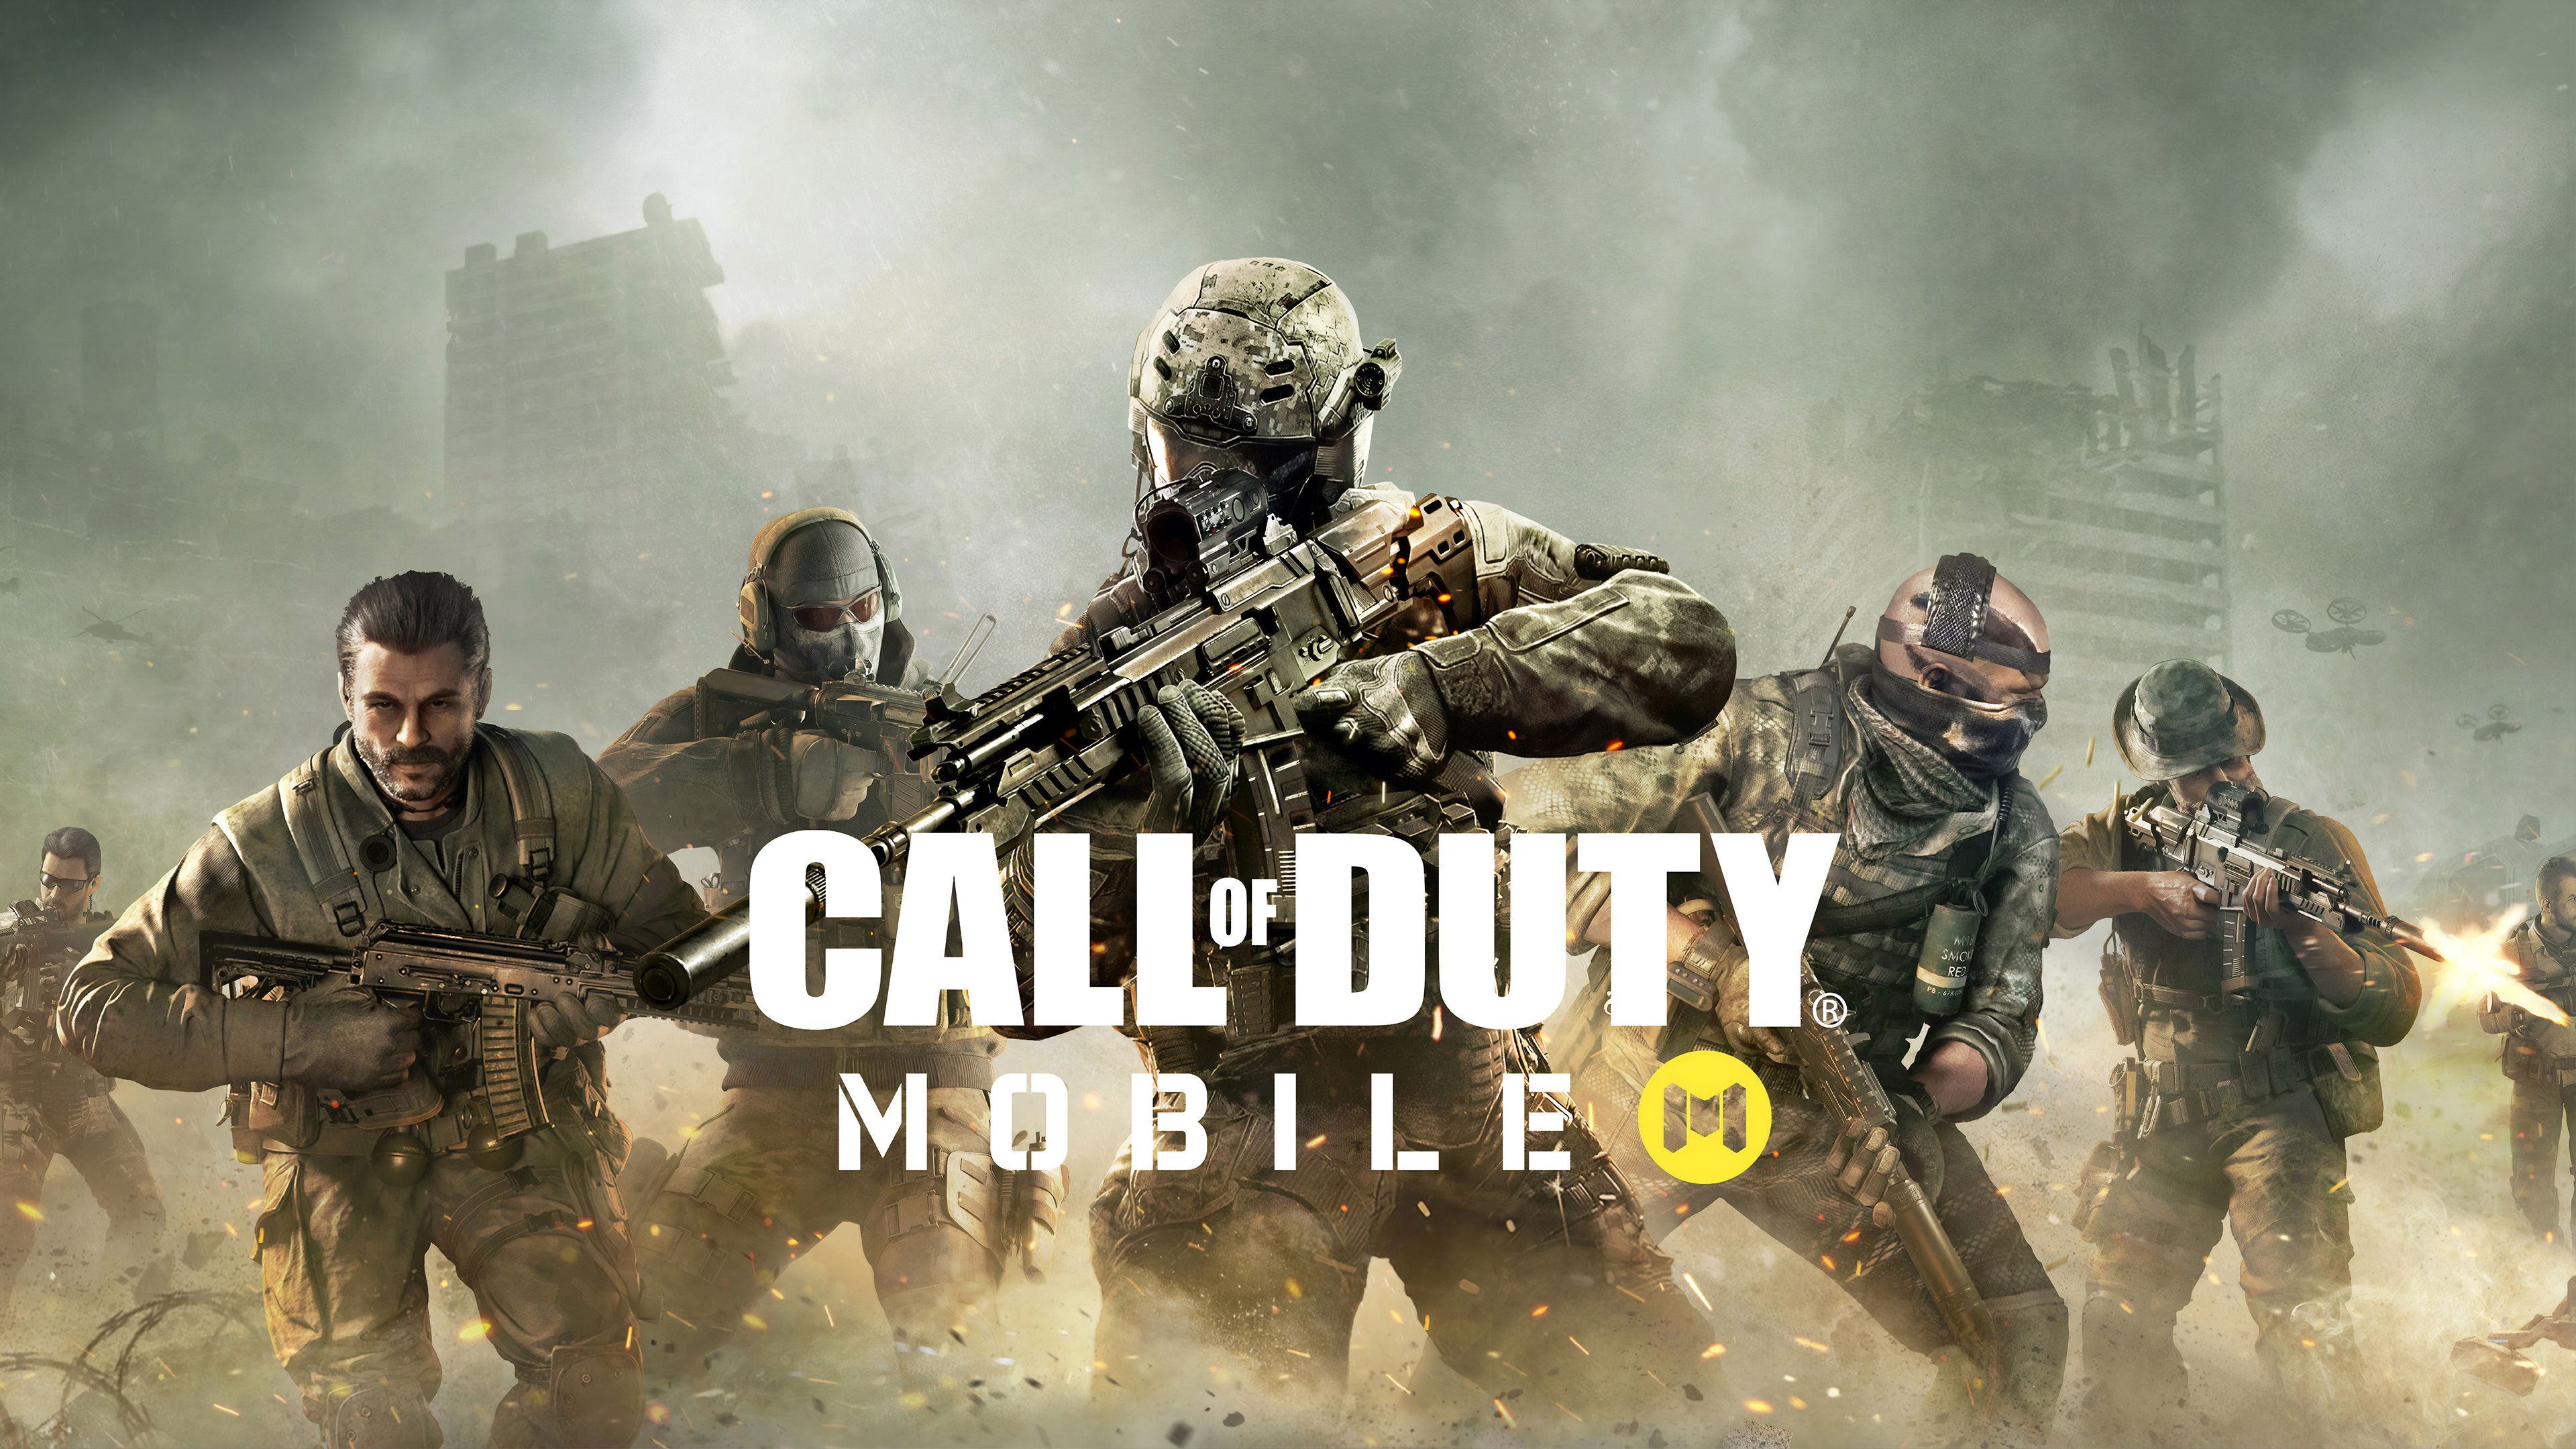 Poster of the computer game Call Of Duty Mobile, 2019 for android